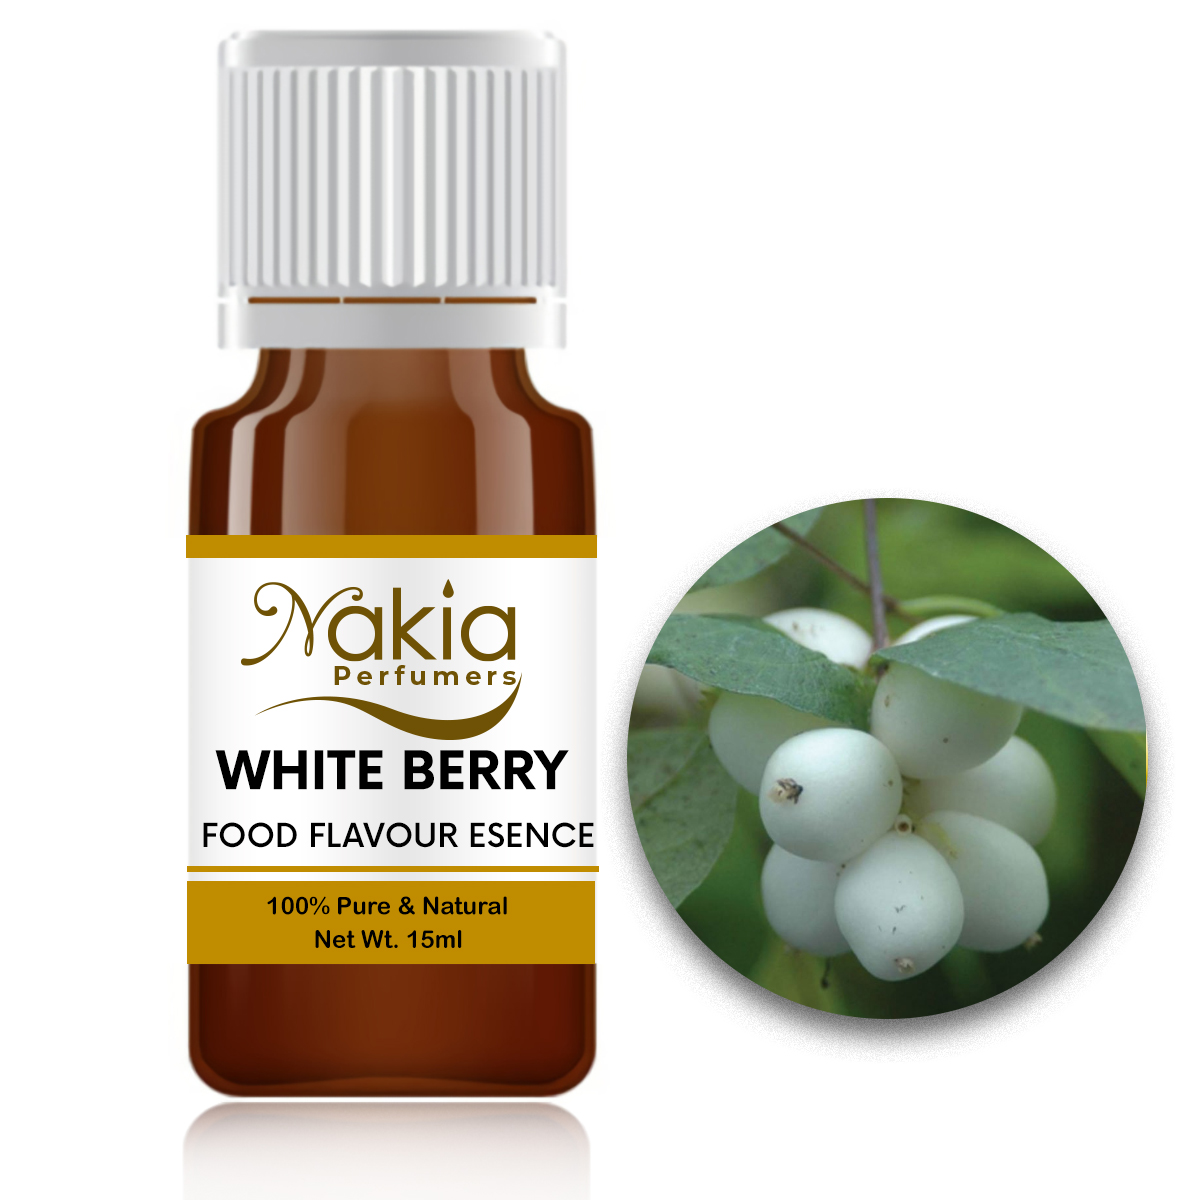 WHITE-BERRY FLAVOURING ESSENCE